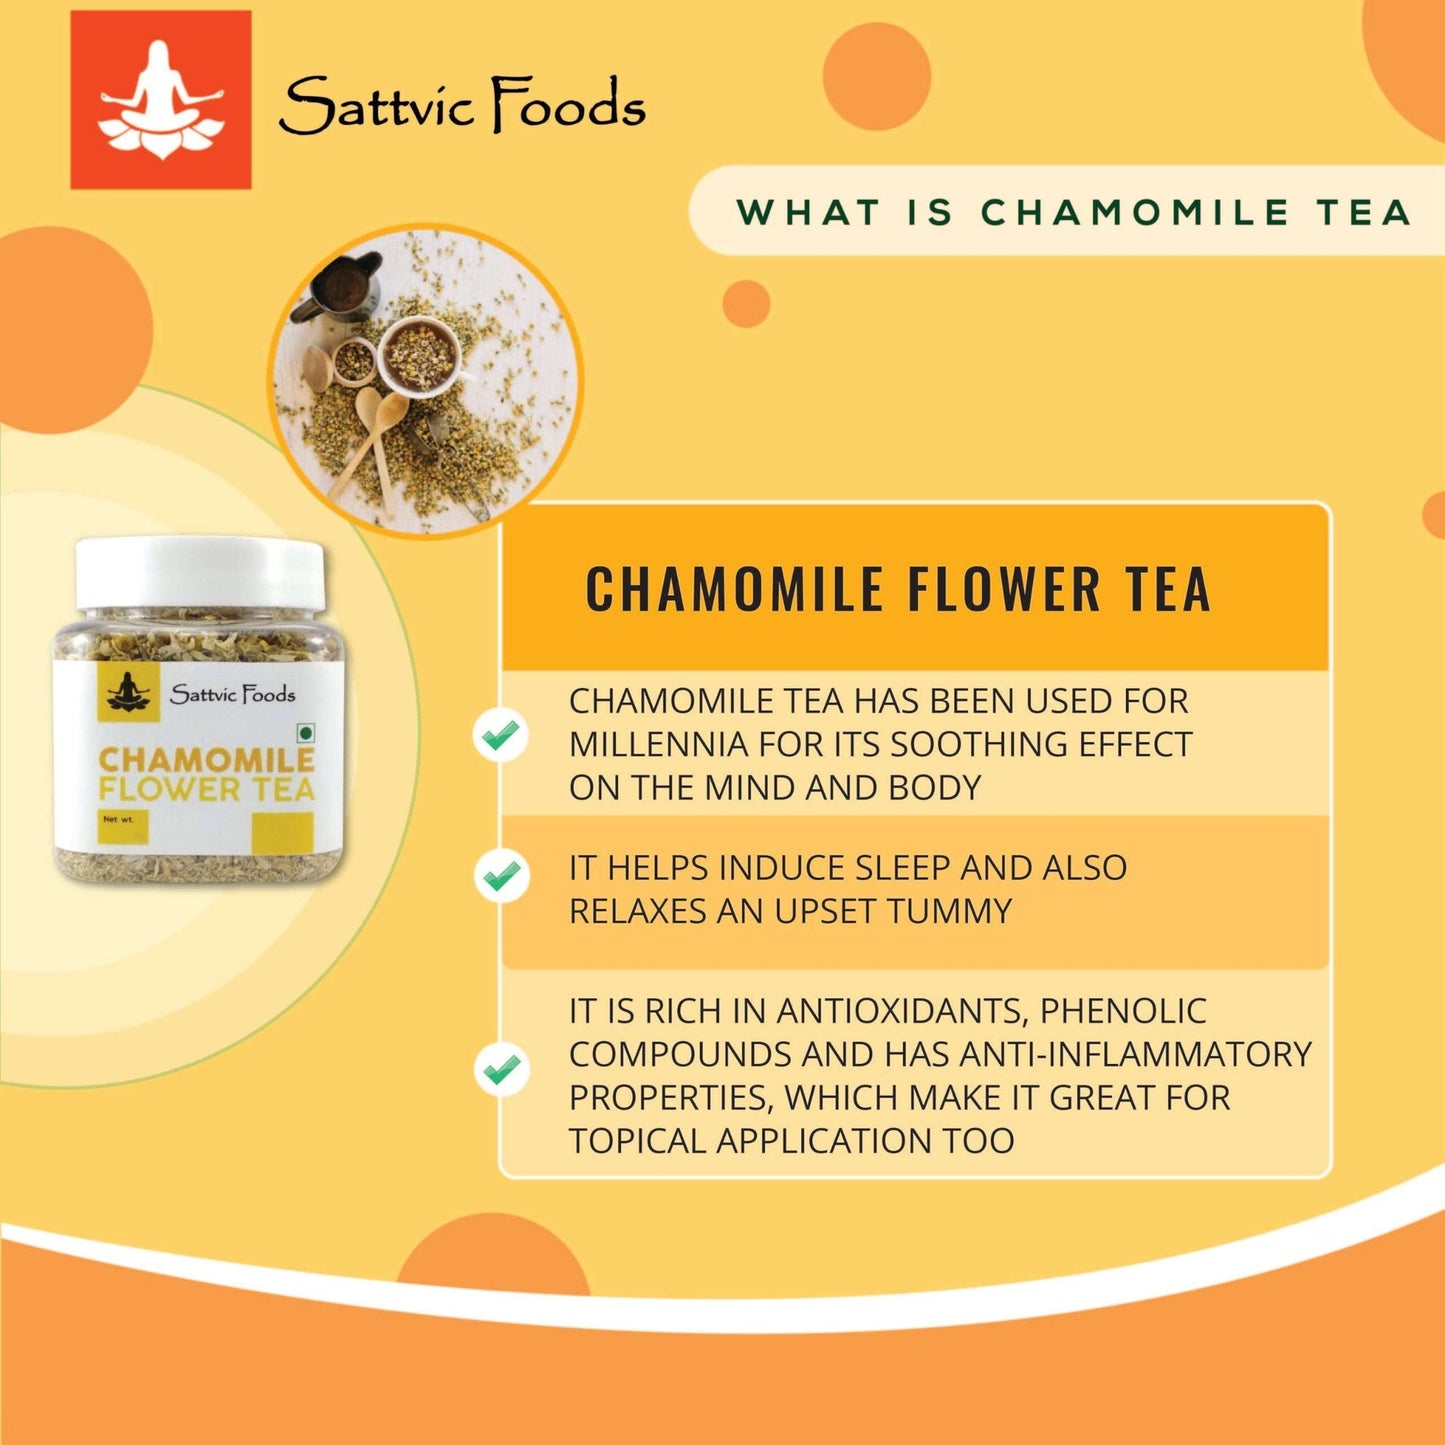 Chamomile Flower Tea - What is it ?